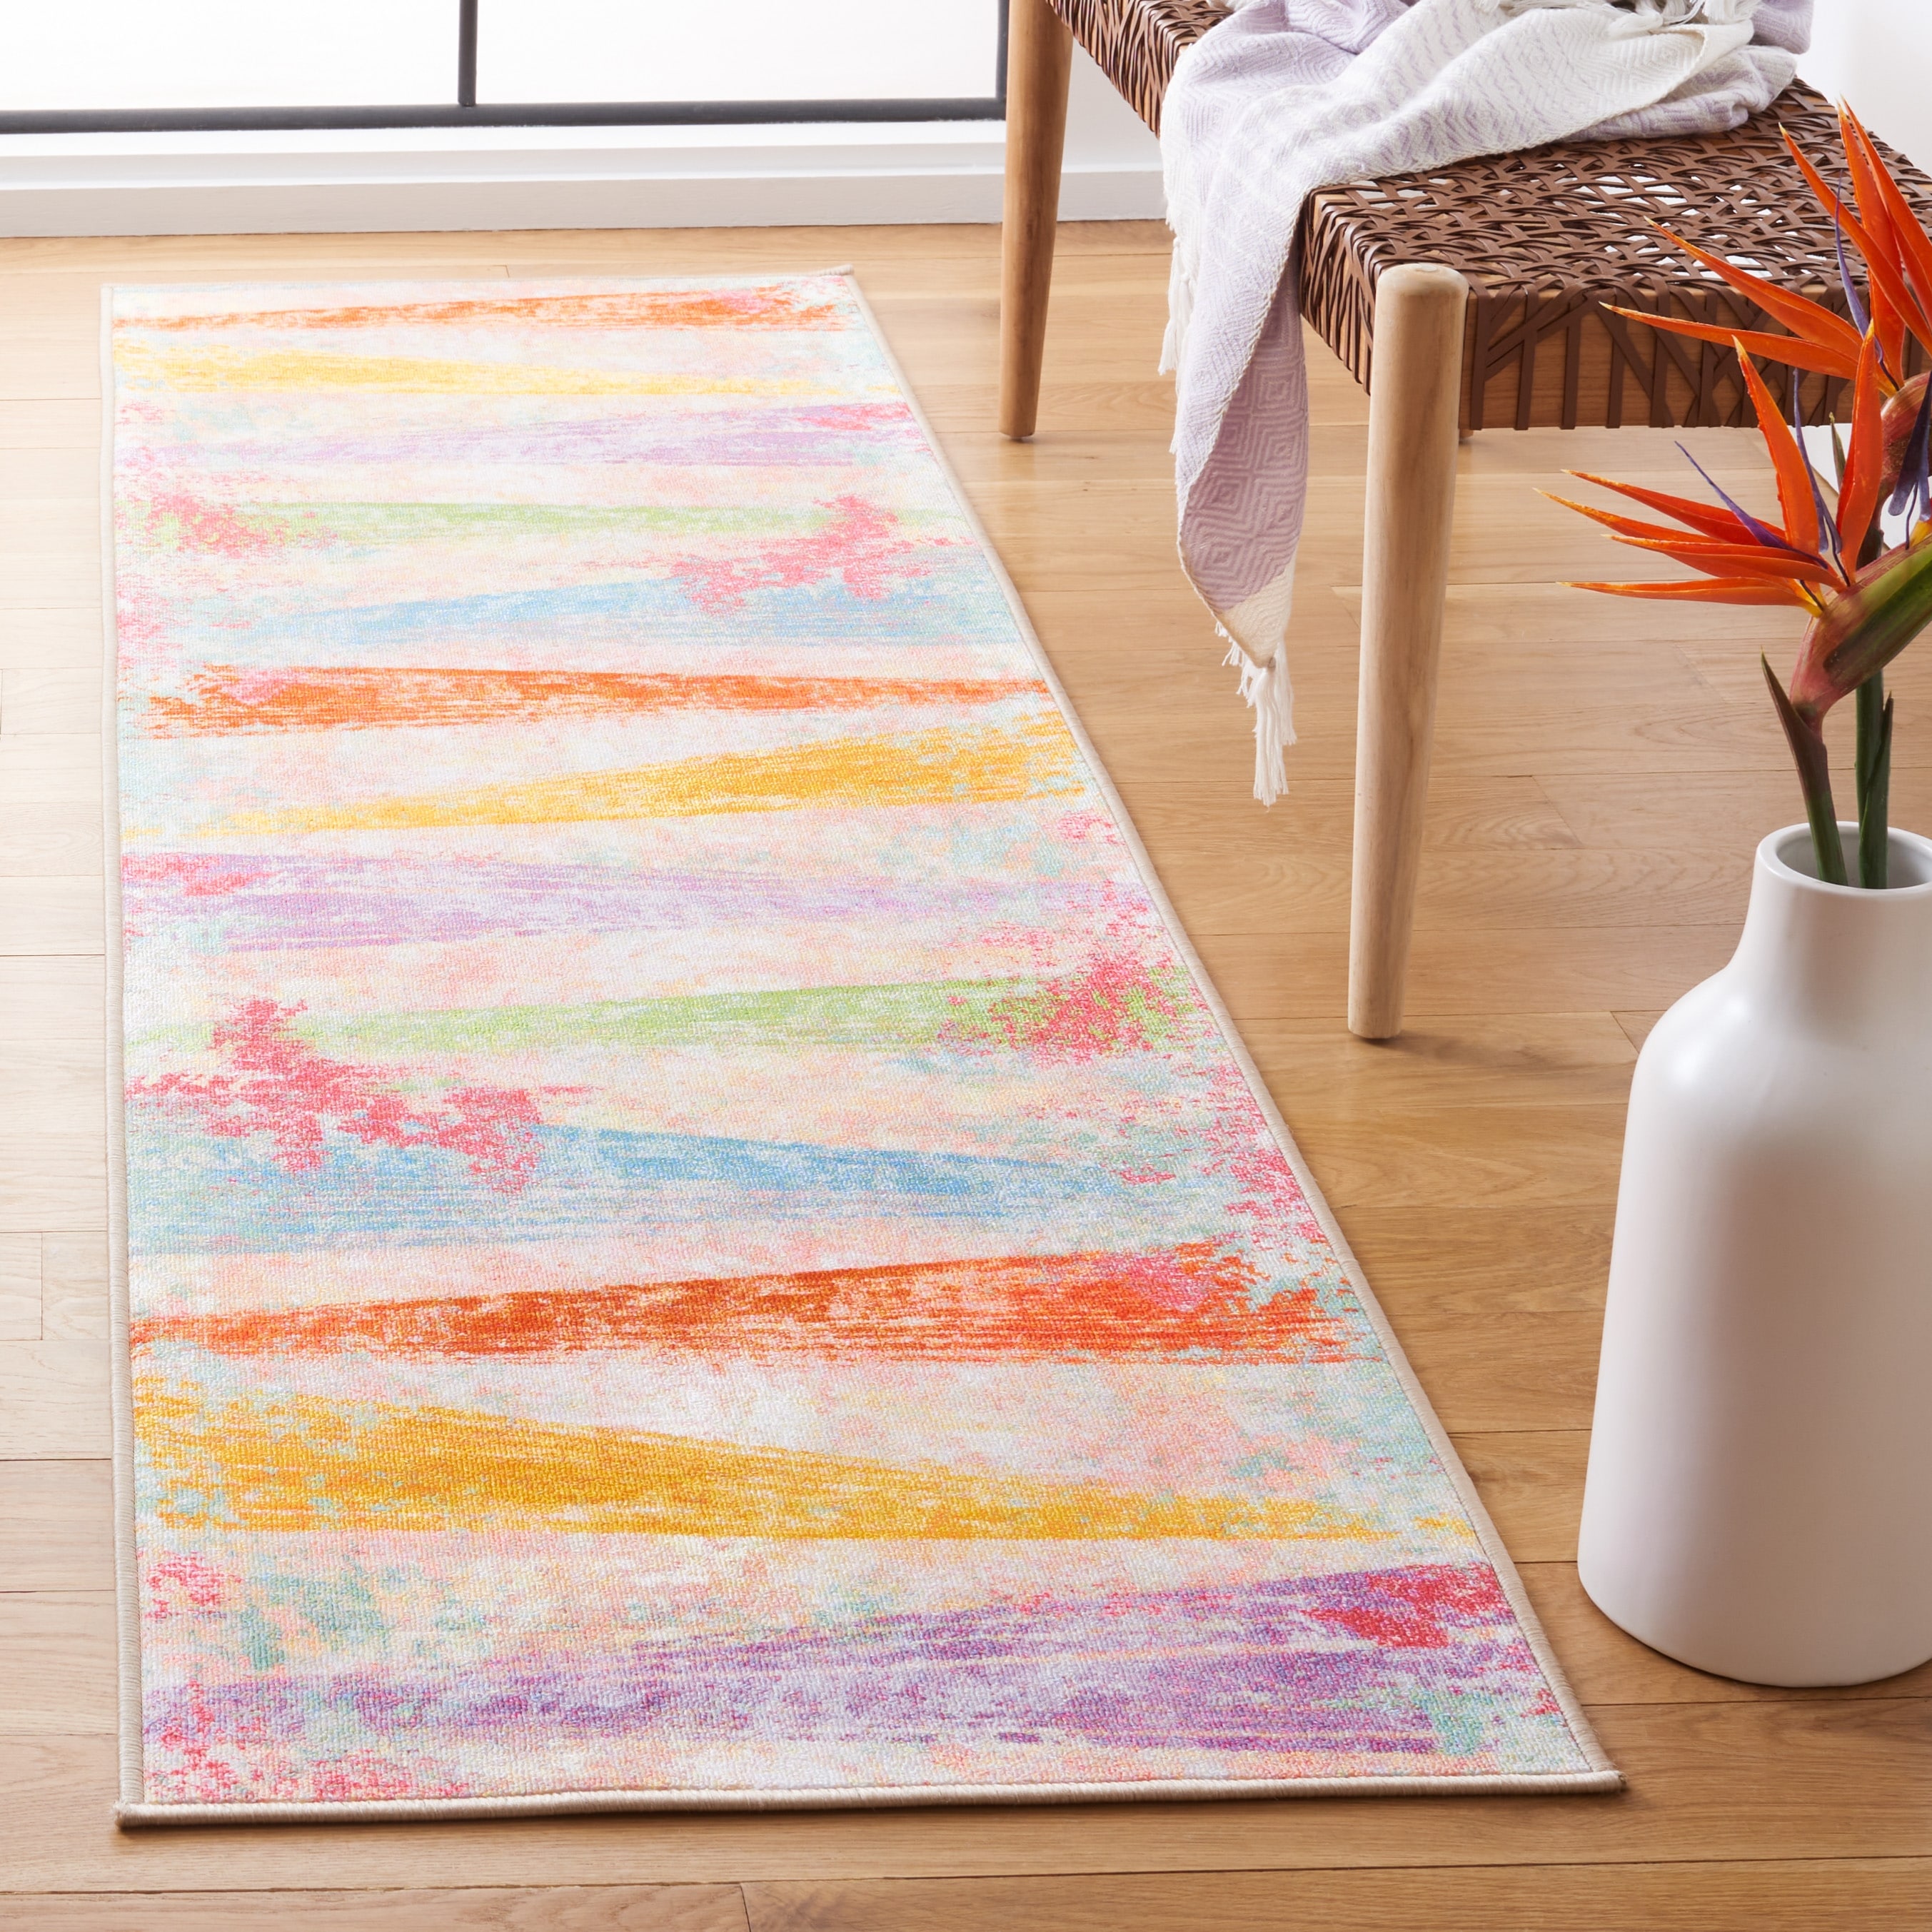 https://ak1.ostkcdn.com/images/products/is/images/direct/3ba2cc9f5ae7bfd9ff0cc86bb338eabf0d5bf4a6/SAFAVIEH-Paint-Brush-Liilia-Machine-Washable-Rug.jpg